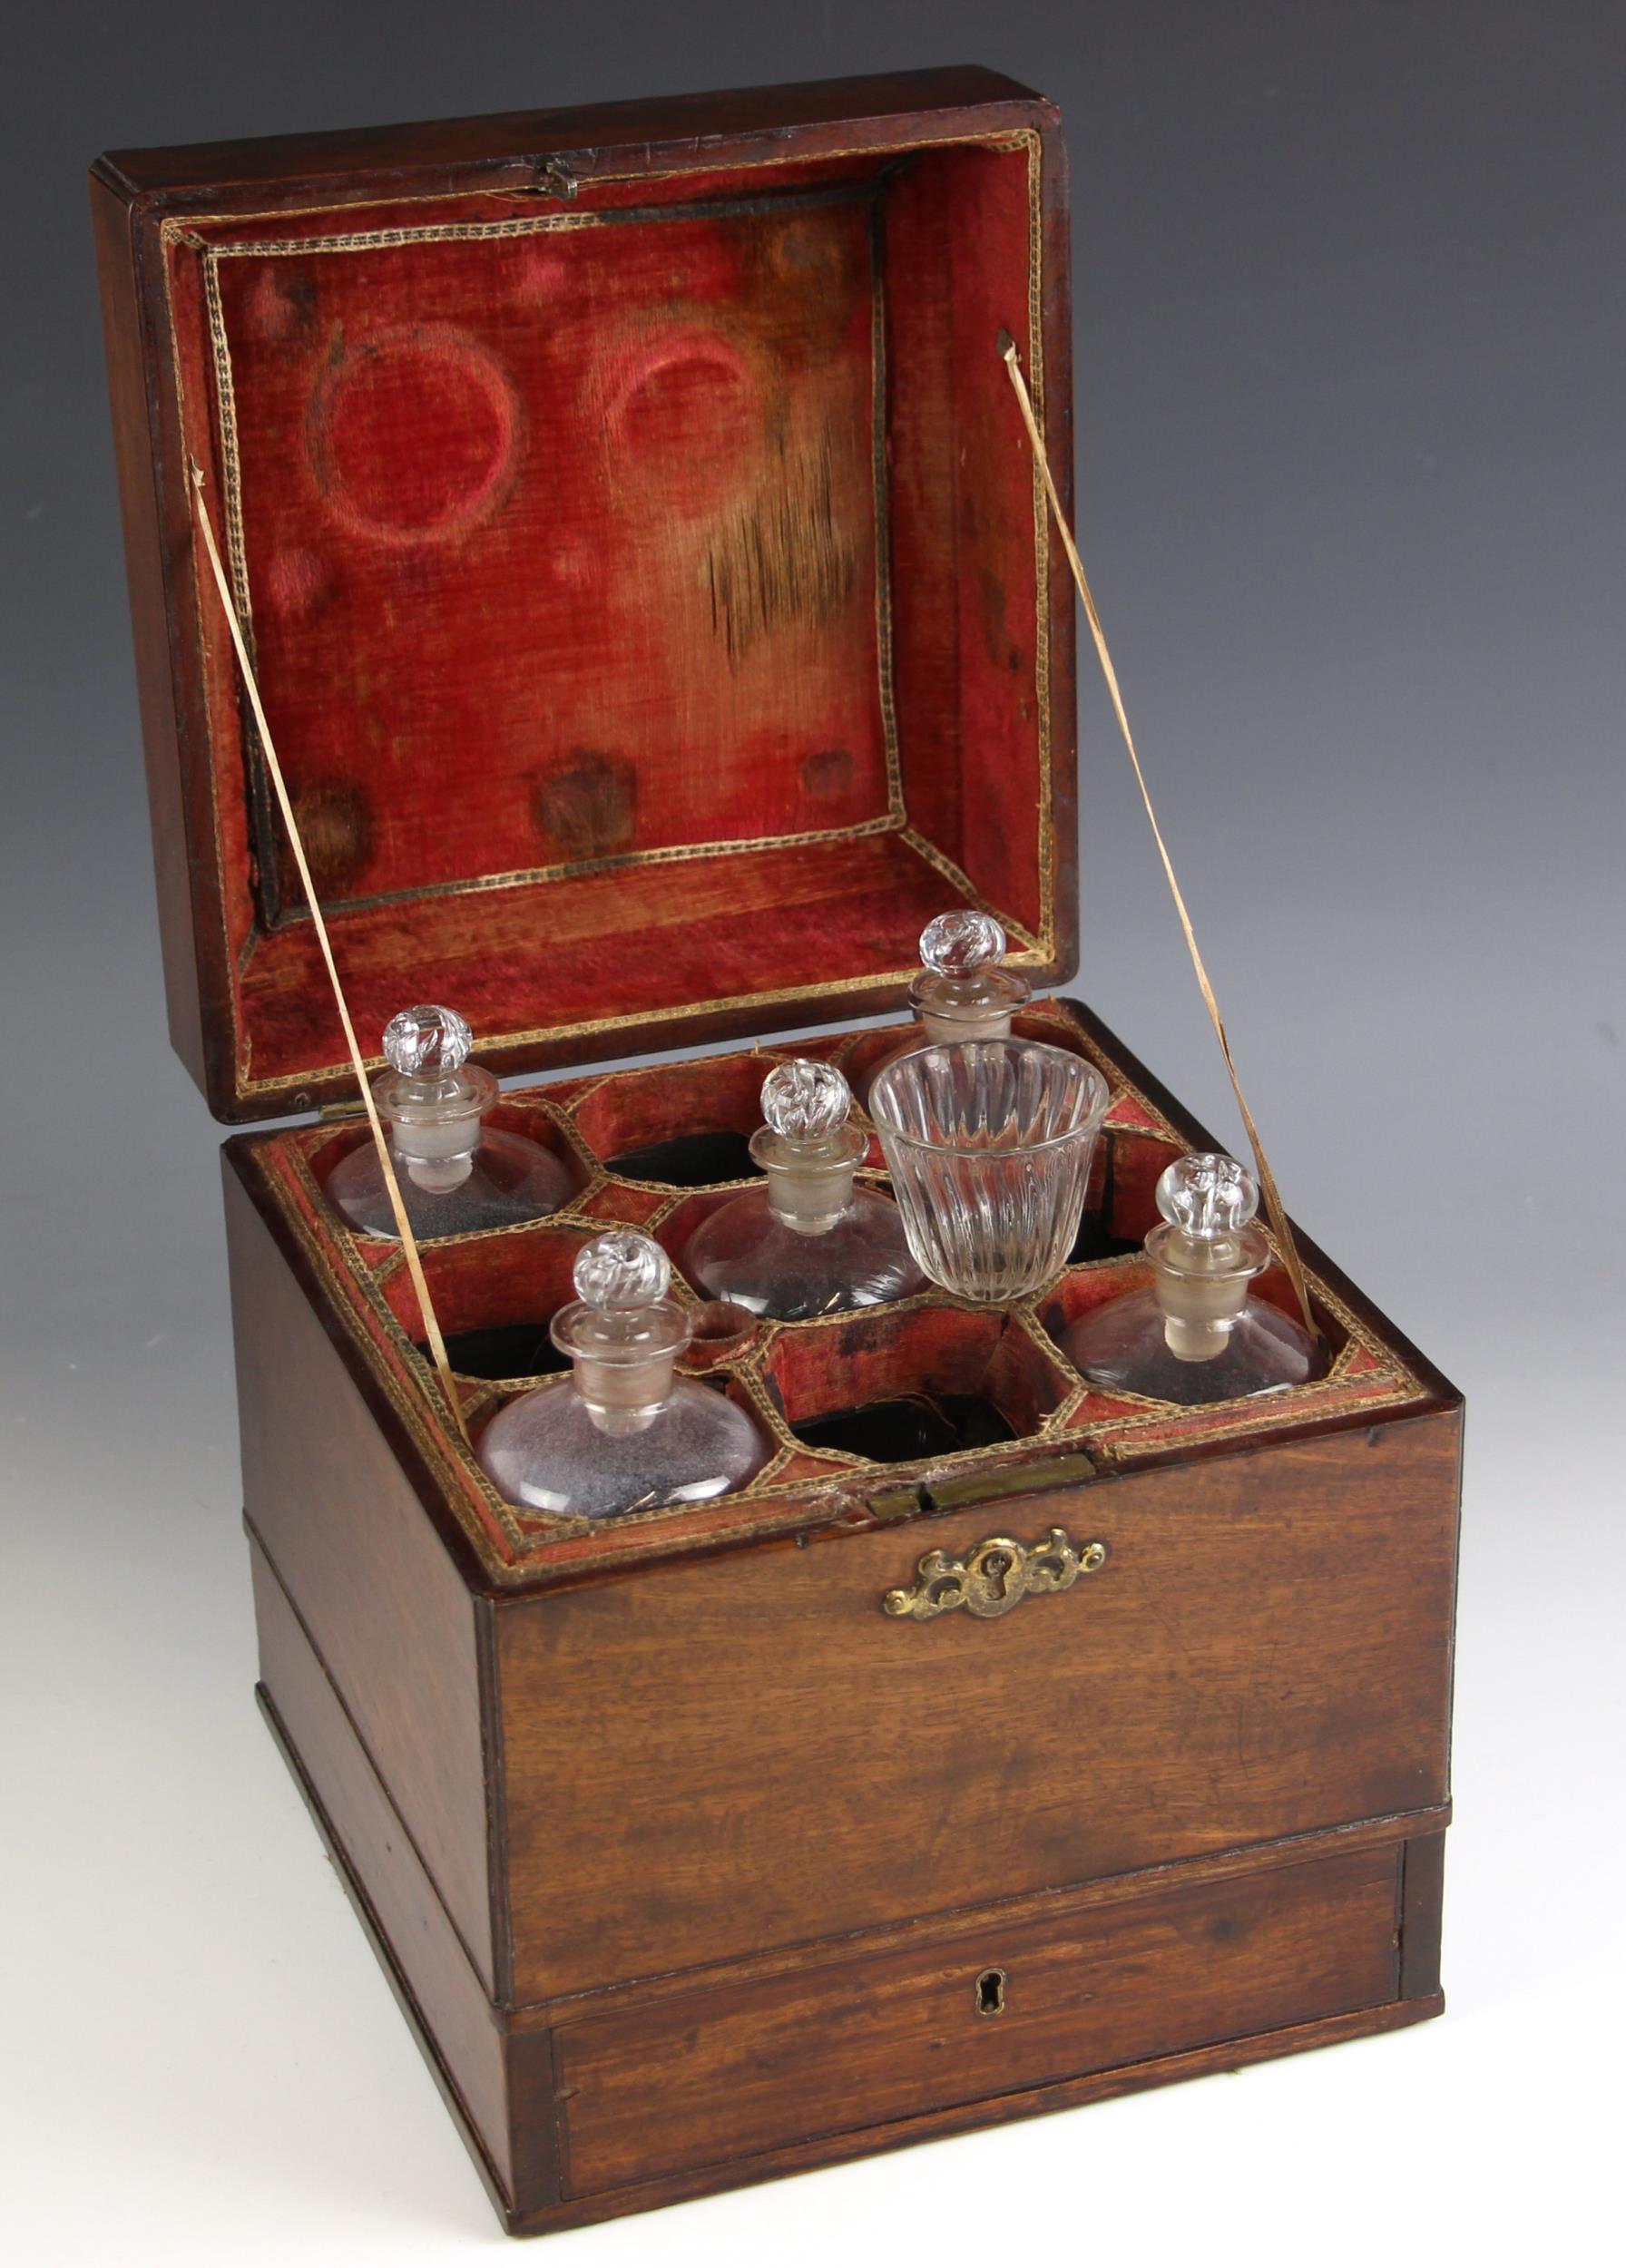 A George III mahogany apothecary box, the hinged cover with a brass swan neck swing handle opening - Image 2 of 2